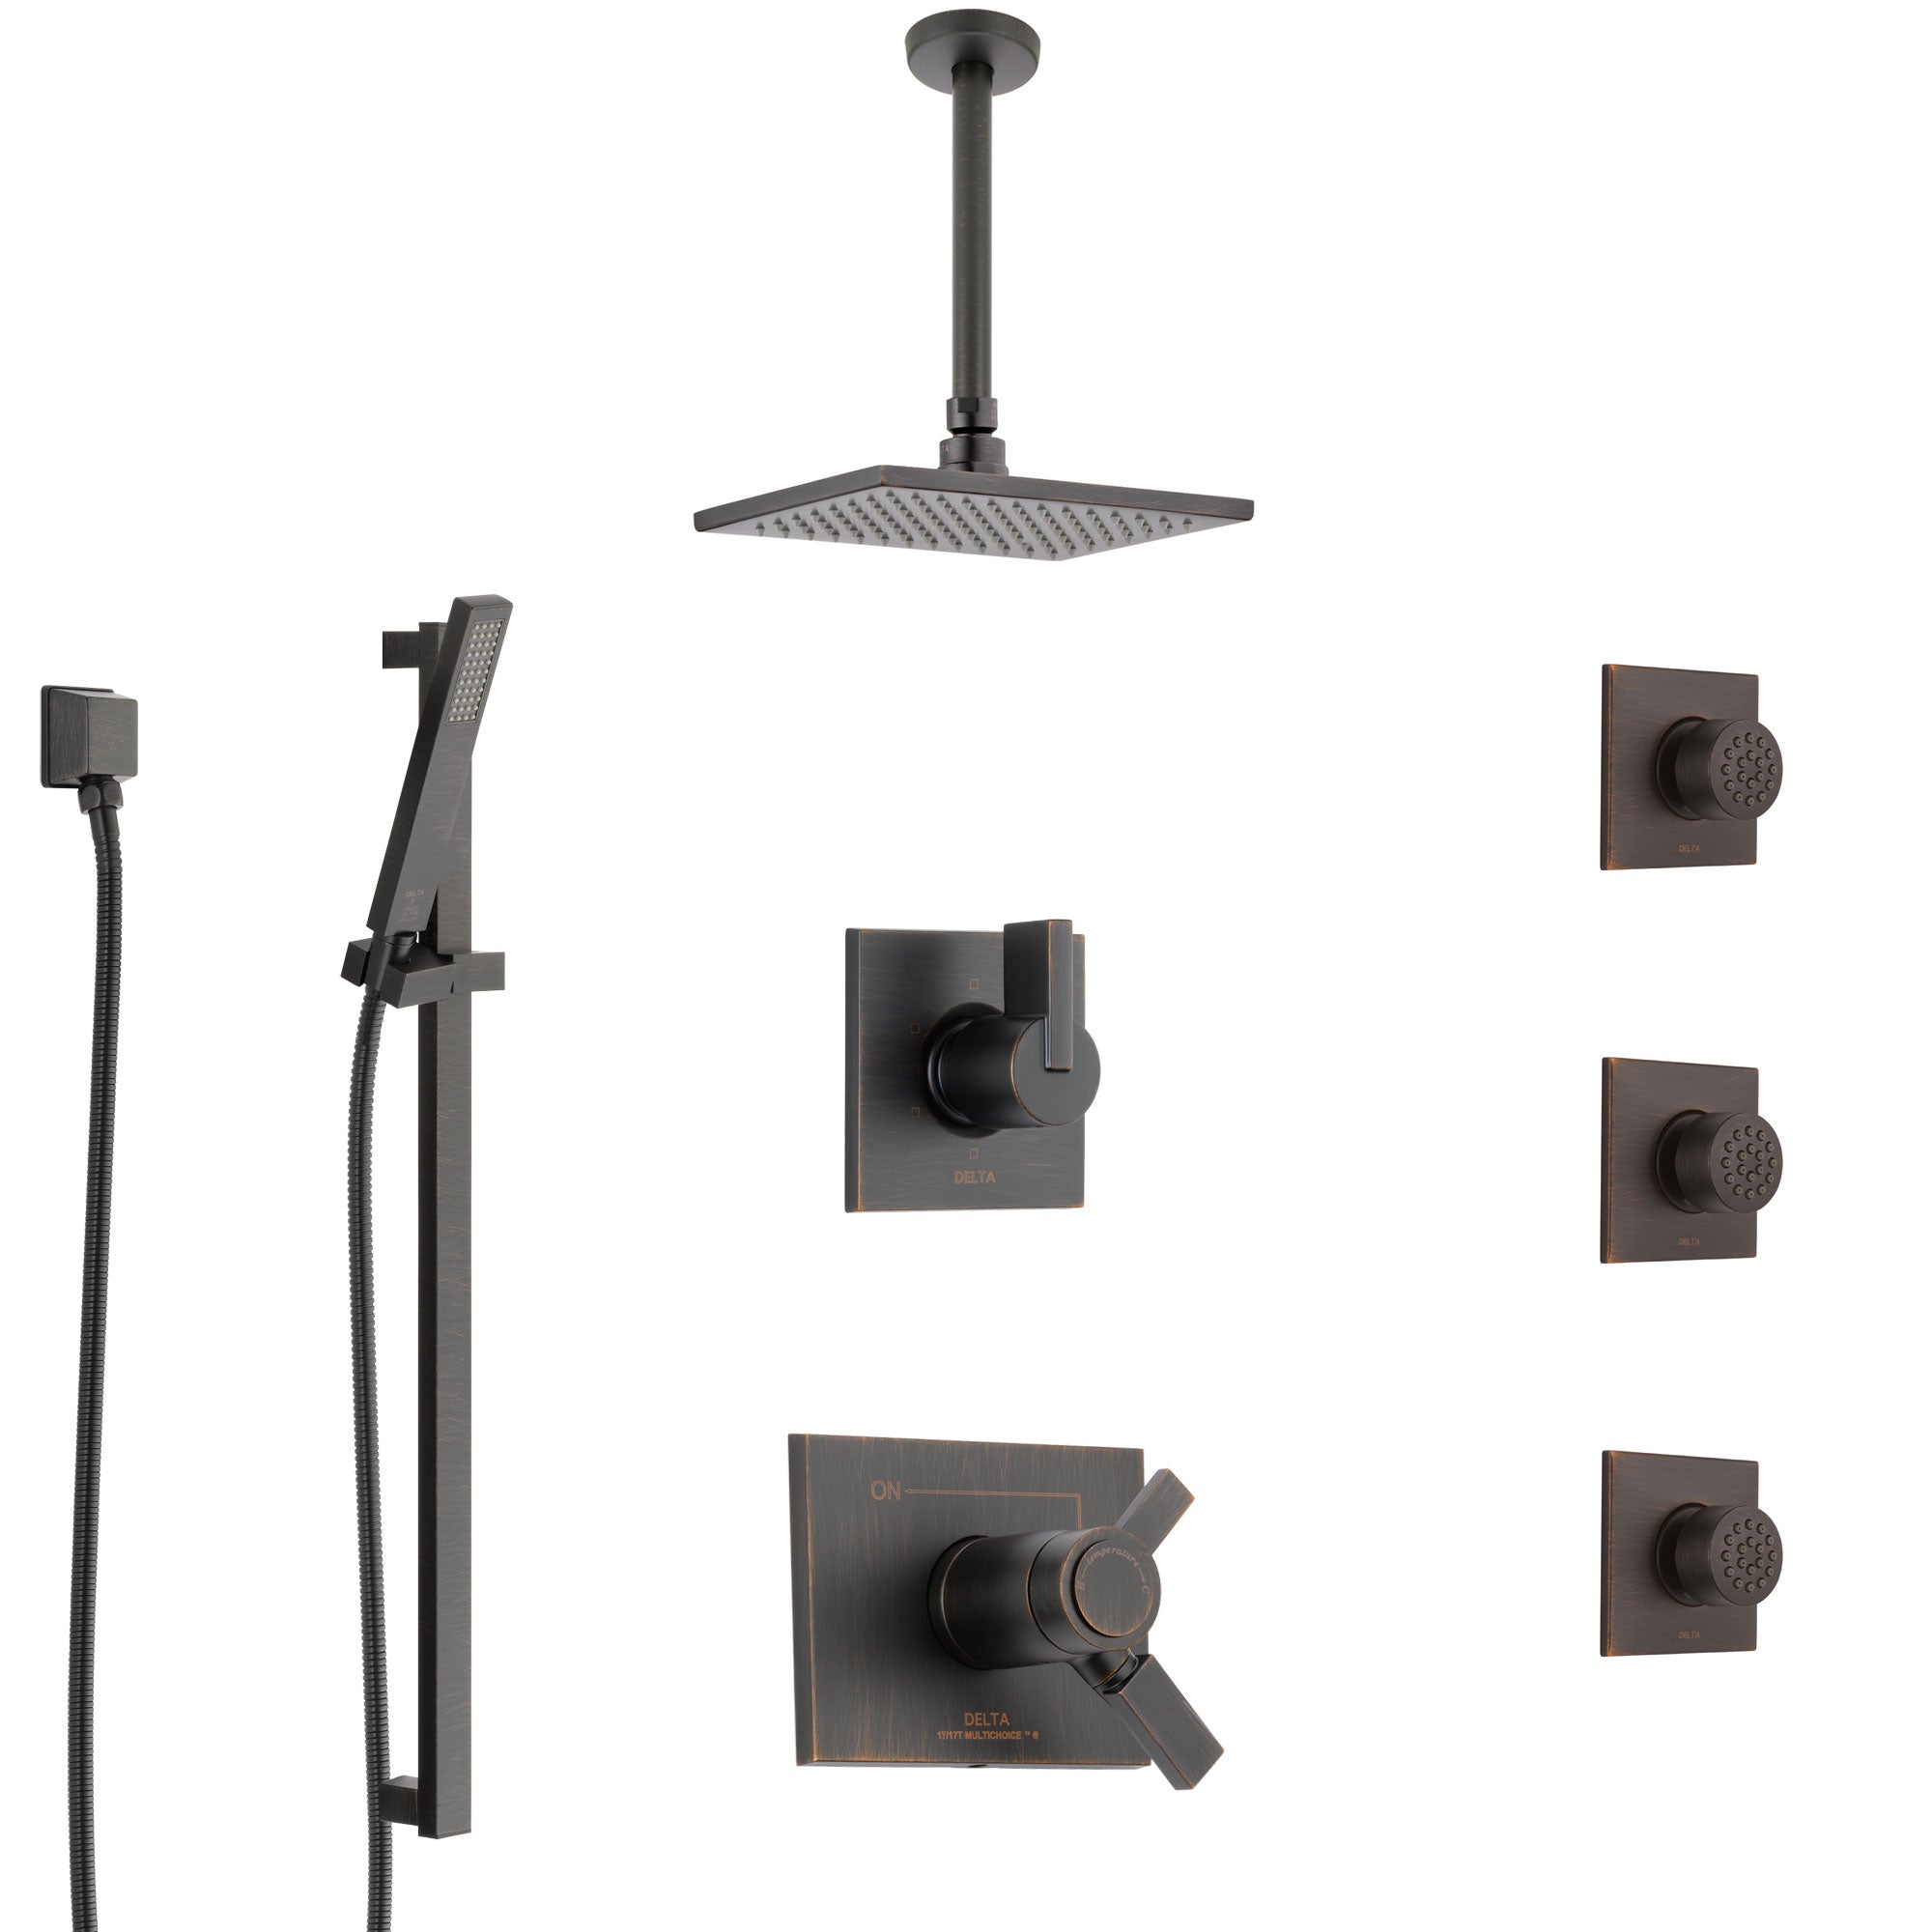 Delta Vero Venetian Bronze Shower System with Dual Thermostatic Control, Diverter, Ceiling Showerhead, 3 Body Sprays, and Hand Shower SS17T532RB6